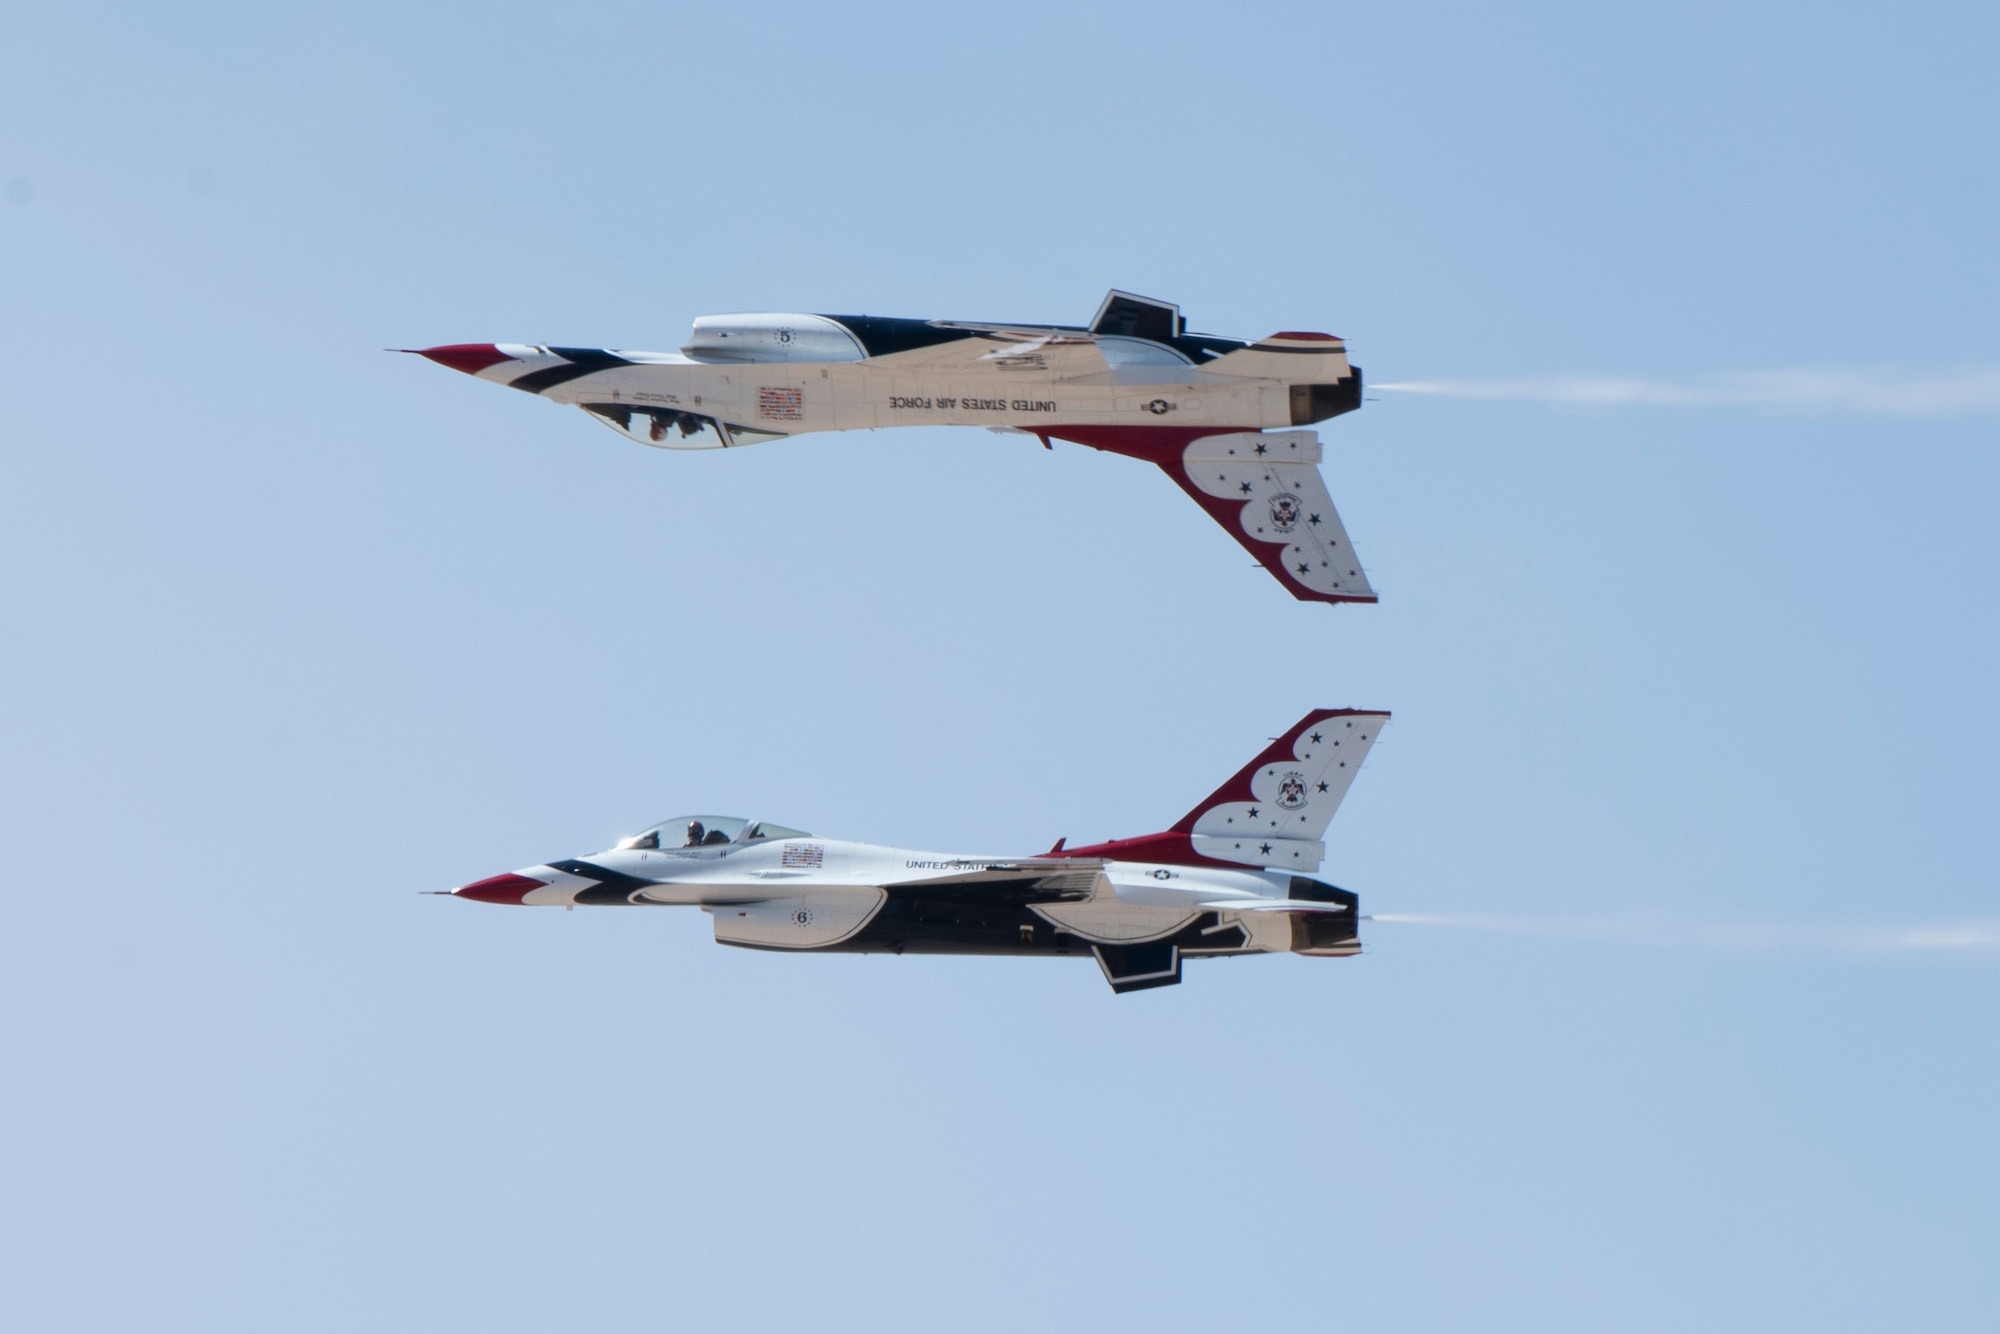 The U.S. Air Force Air Demonstration Squadron, known as the “Thunderbirds,” F-16 Fighting Falcon perform an aerial maneuver at the 2022 Holloman Legacy of Liberty Air Show and Open House May 7, 2022, at Holloman Air Force Base, New Mexico. The mission of the Thunderbirds is to recruit, retain and inspire, and travel across the country to showcase the Air Force mission. (U.S. Air Force photo by Airman Isaiah Pedrazzini)